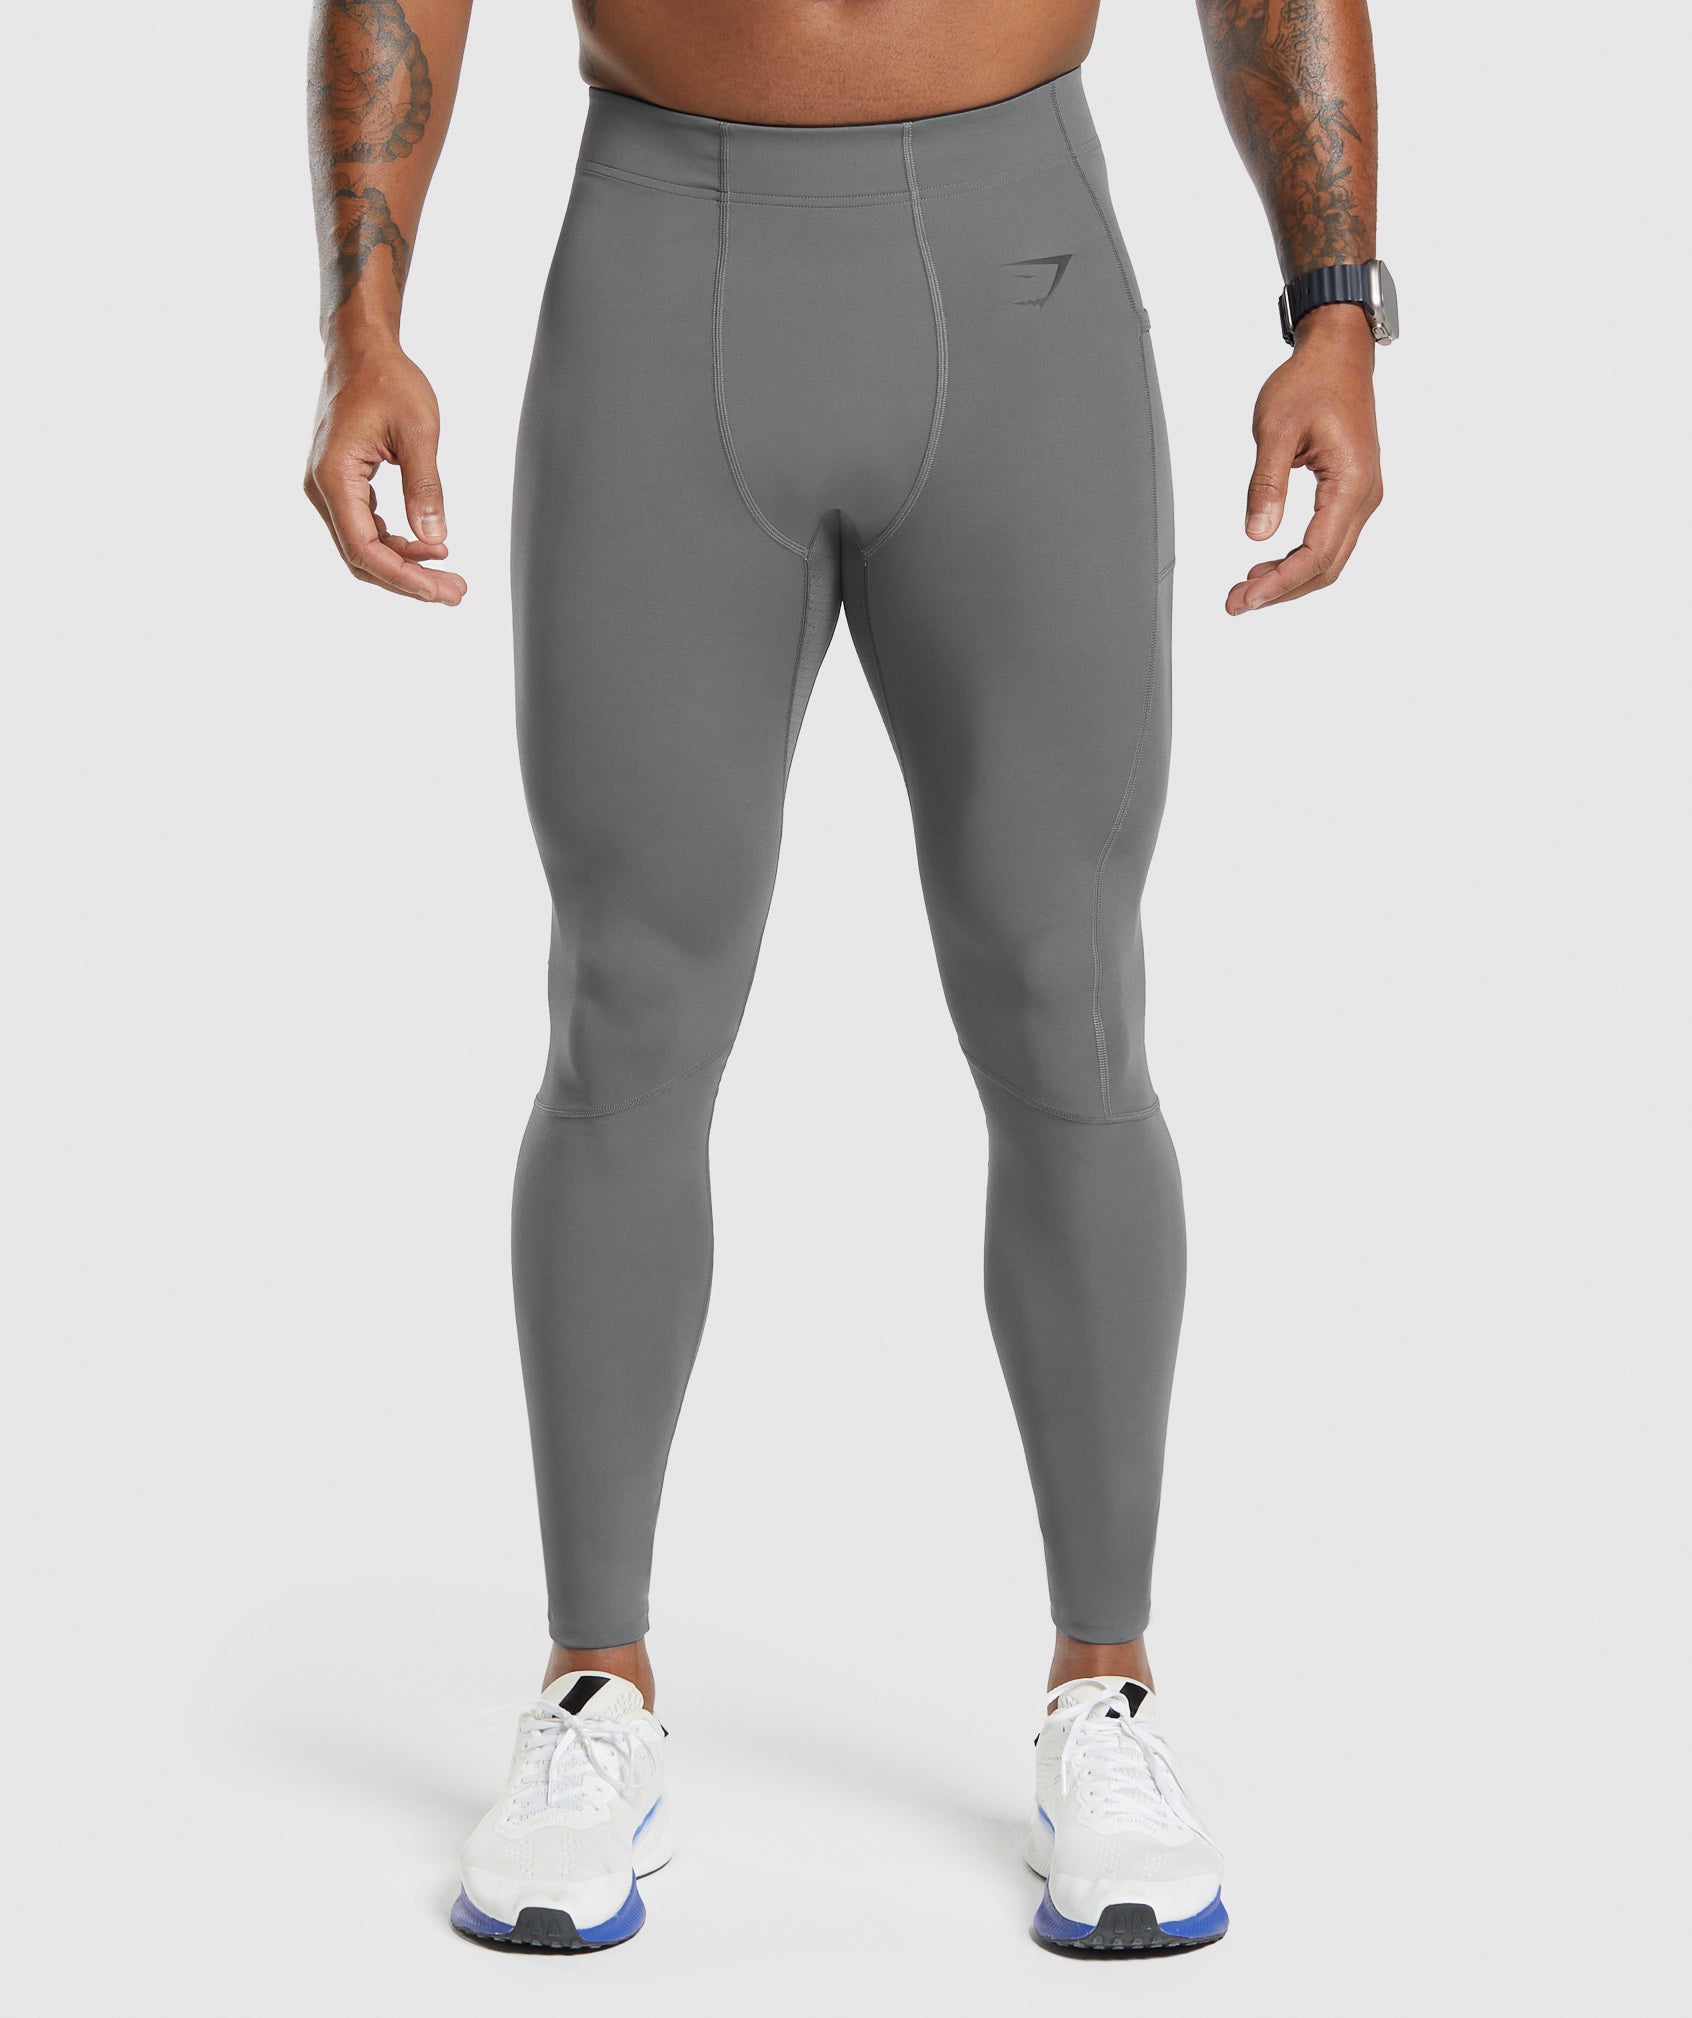 Control Baselayer Legging in Pitch Grey - view 1